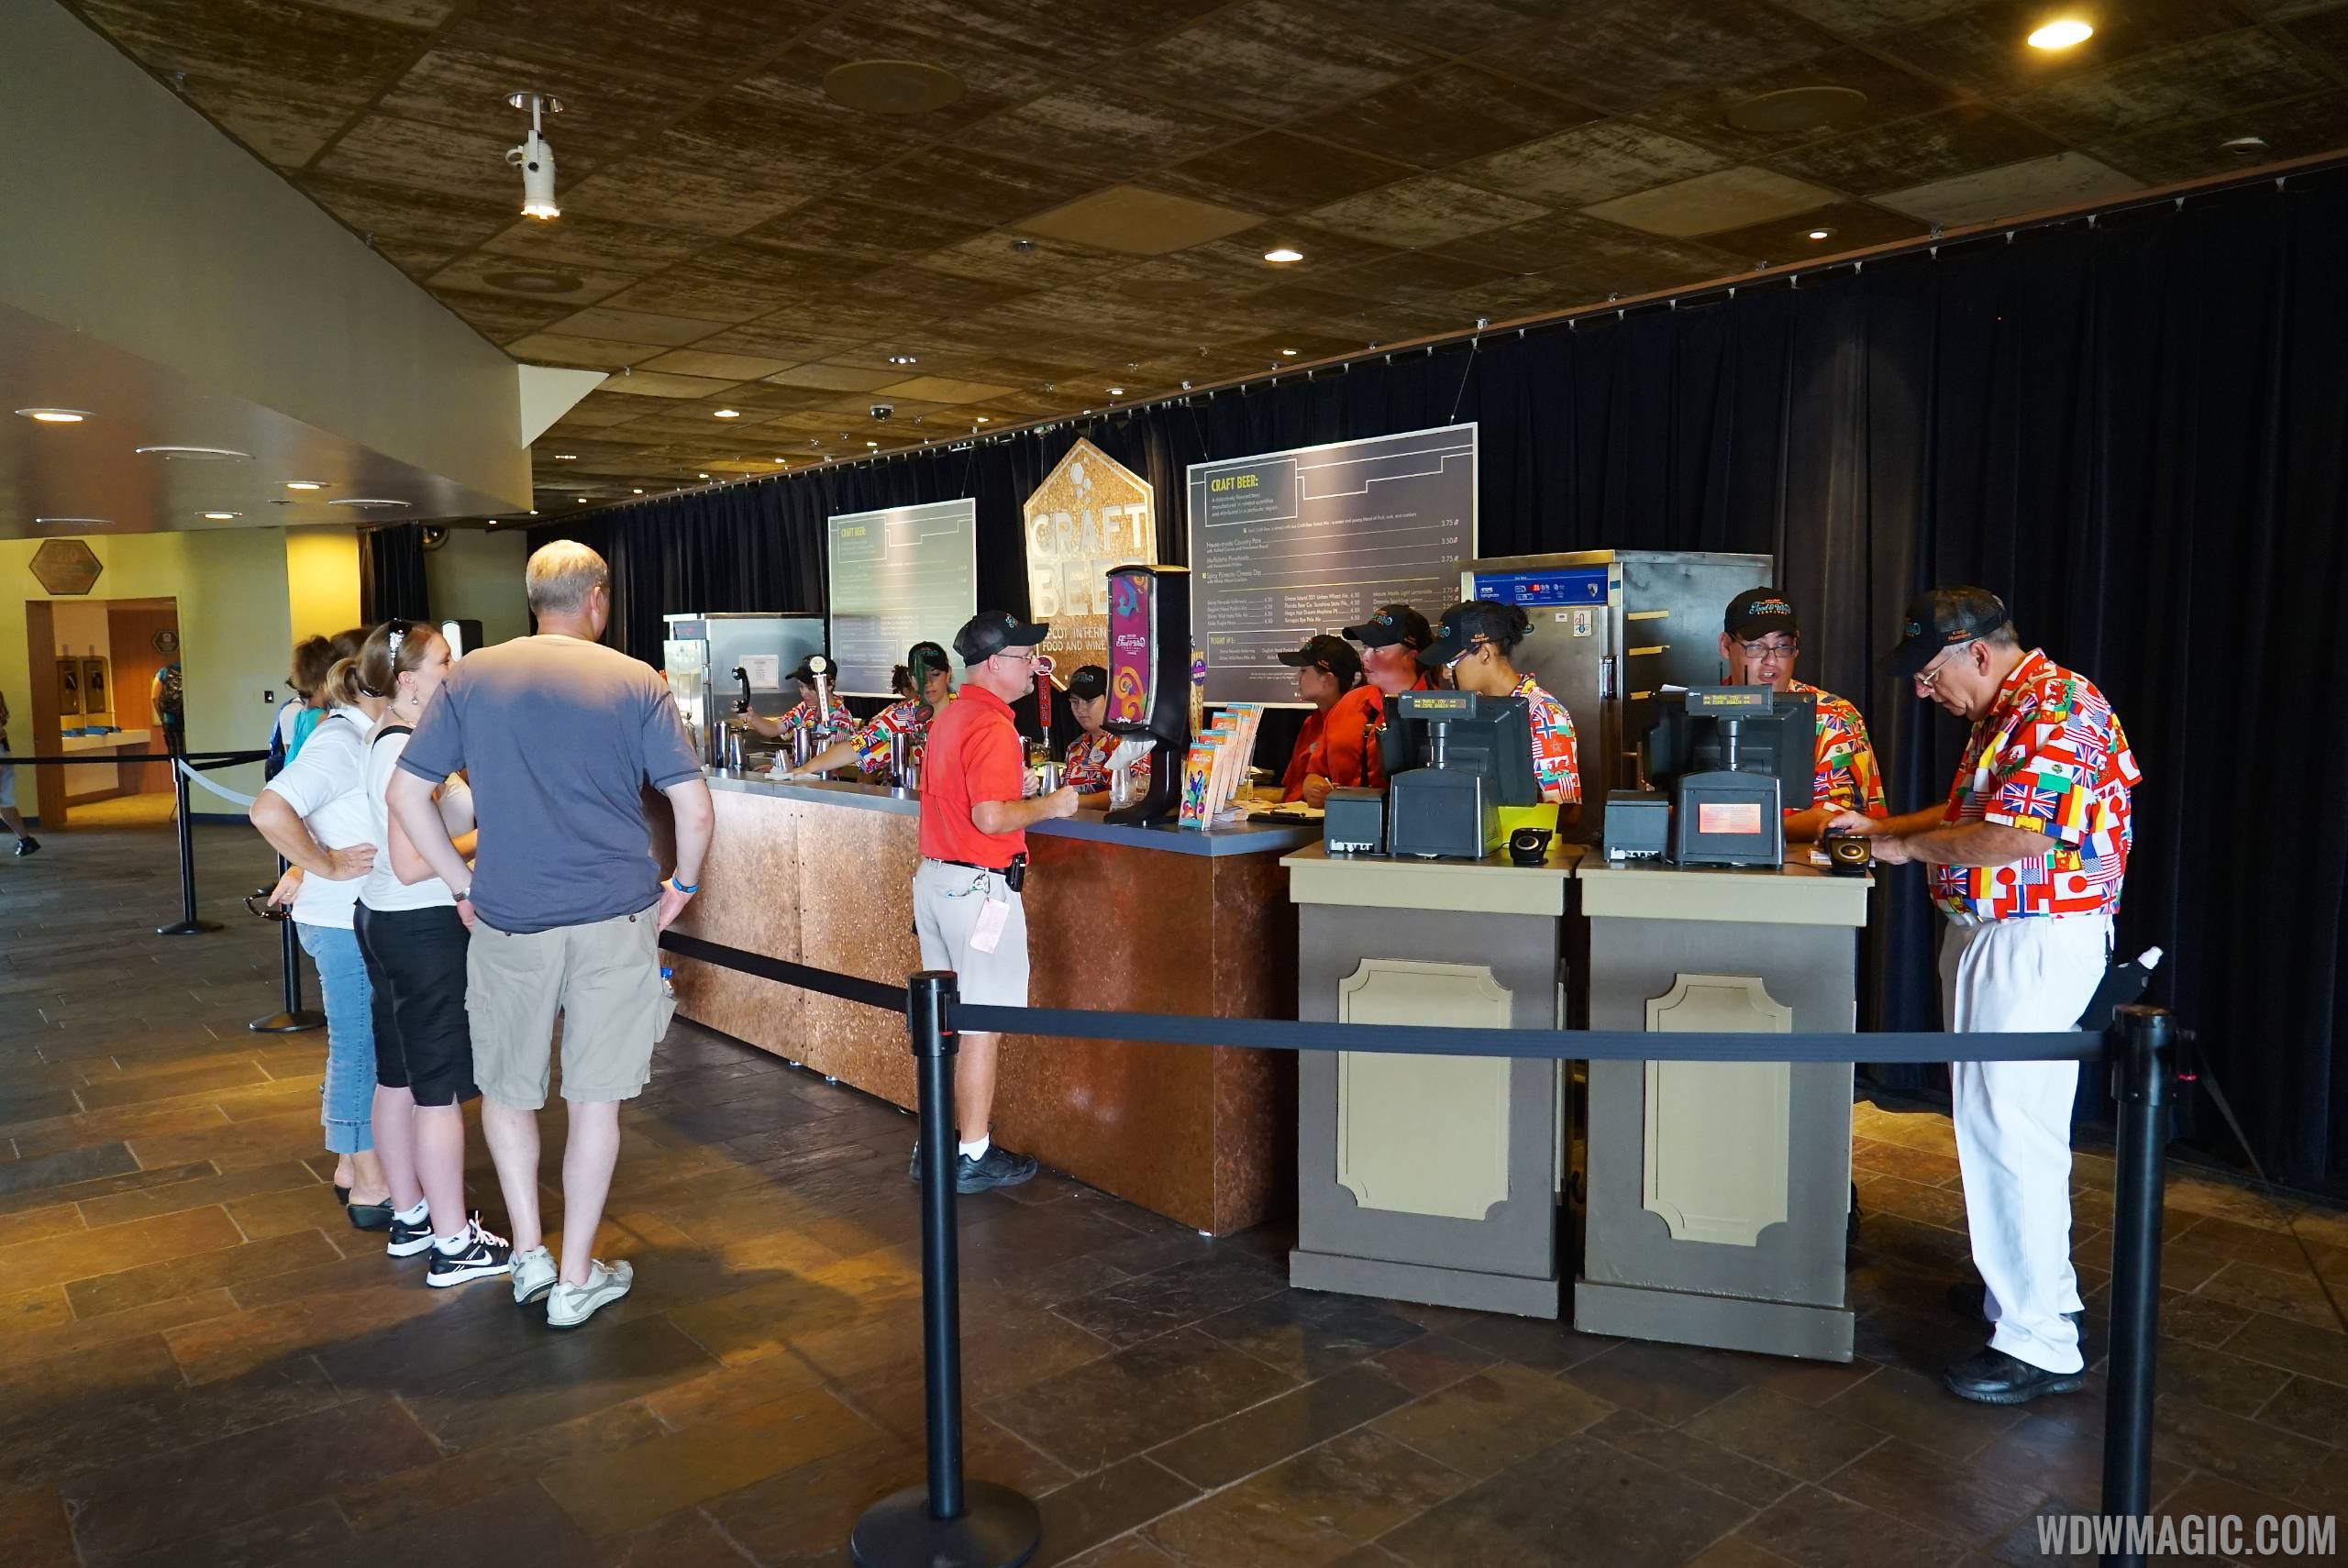 PHOTOS - Inside the Odyssey Craft Beer Center at Epcot Food and Wine Festival